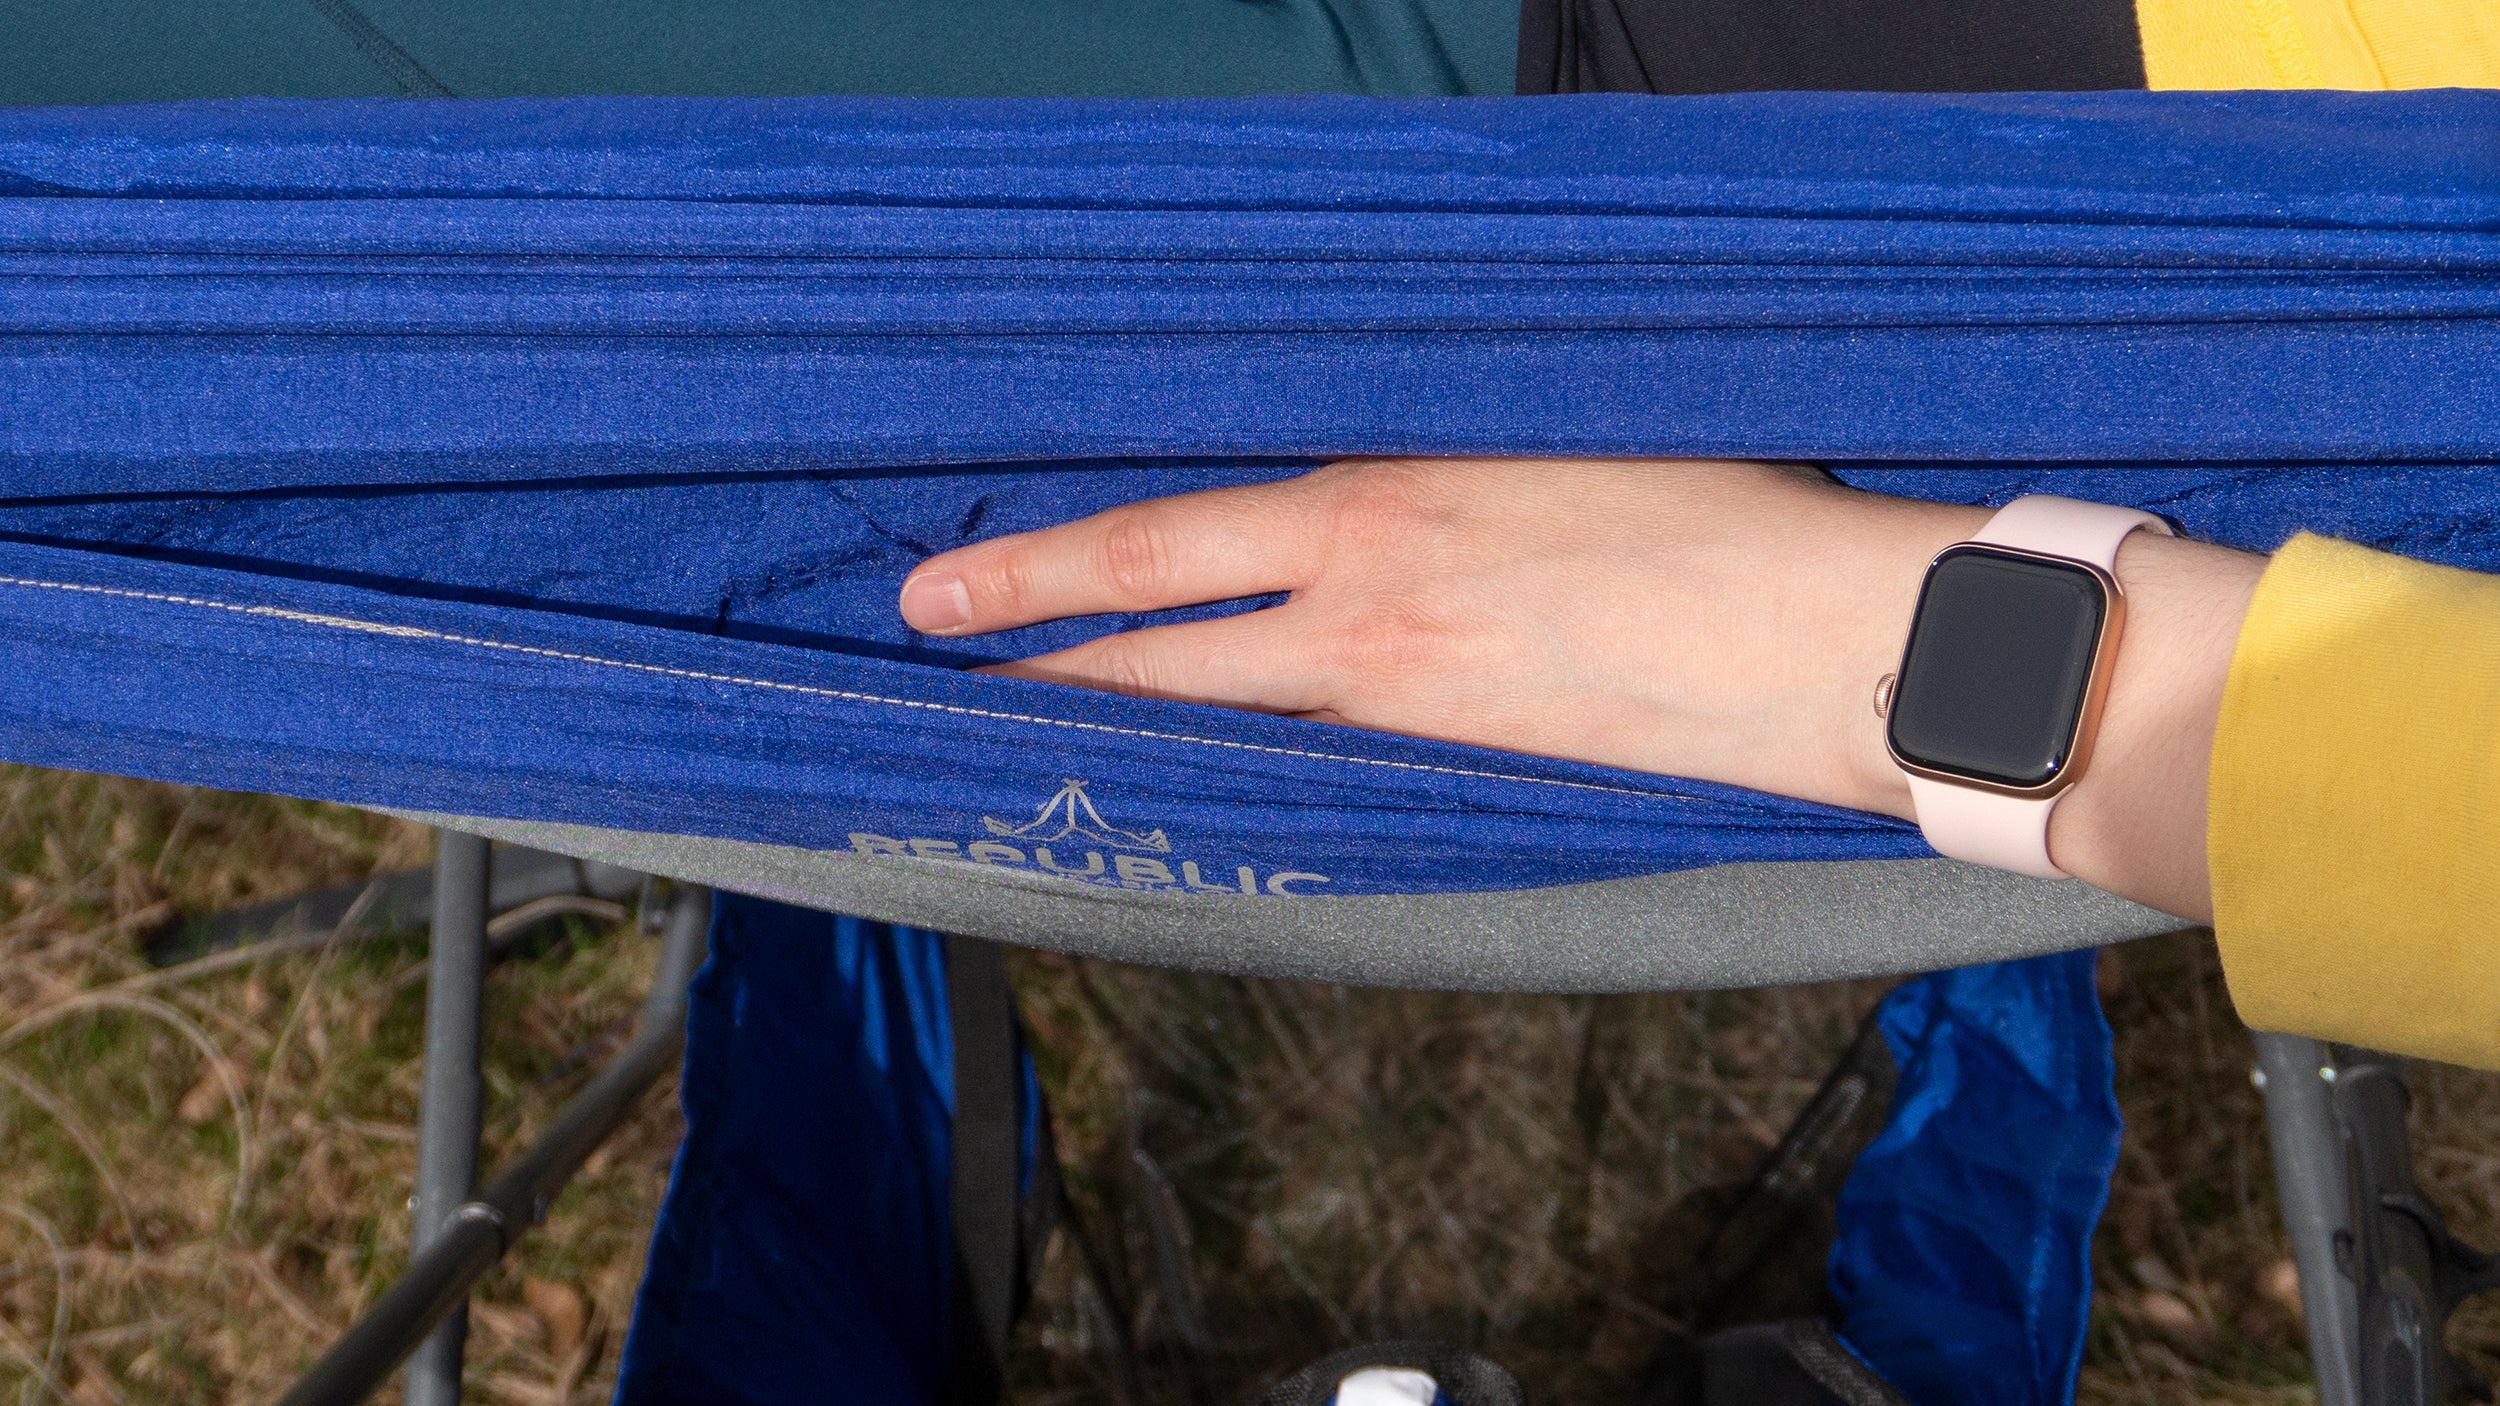 A long, deep side pocket included on either side of the Mock ONE is easily accessible and provide enough storage for everything from phones to tablets to water bottles to sunscreen. (Photo: Andrew Liszewski/Gizmodo)